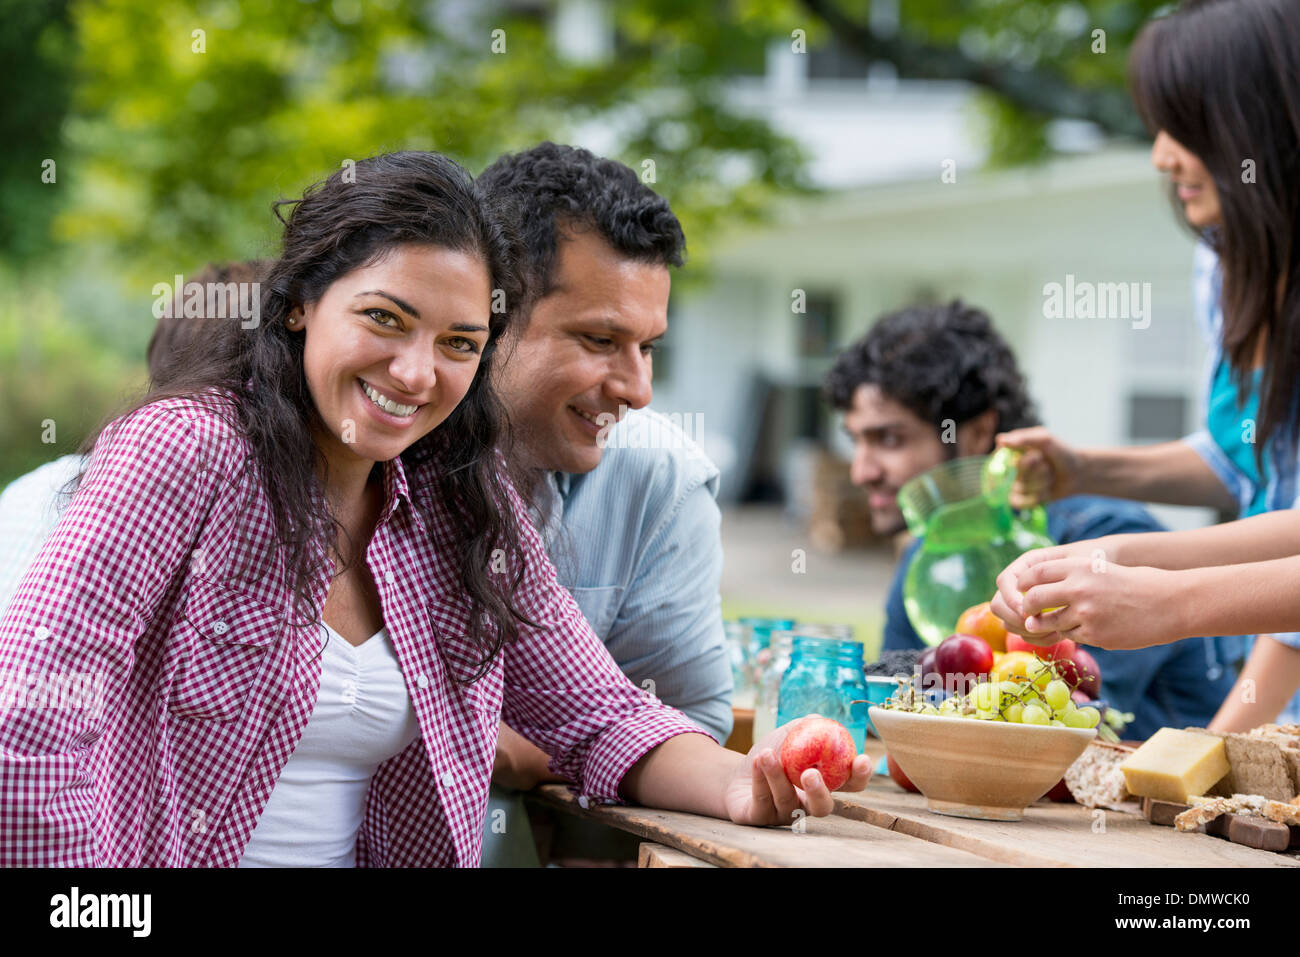 A summer party outdoors. Friends around a table. Stock Photo